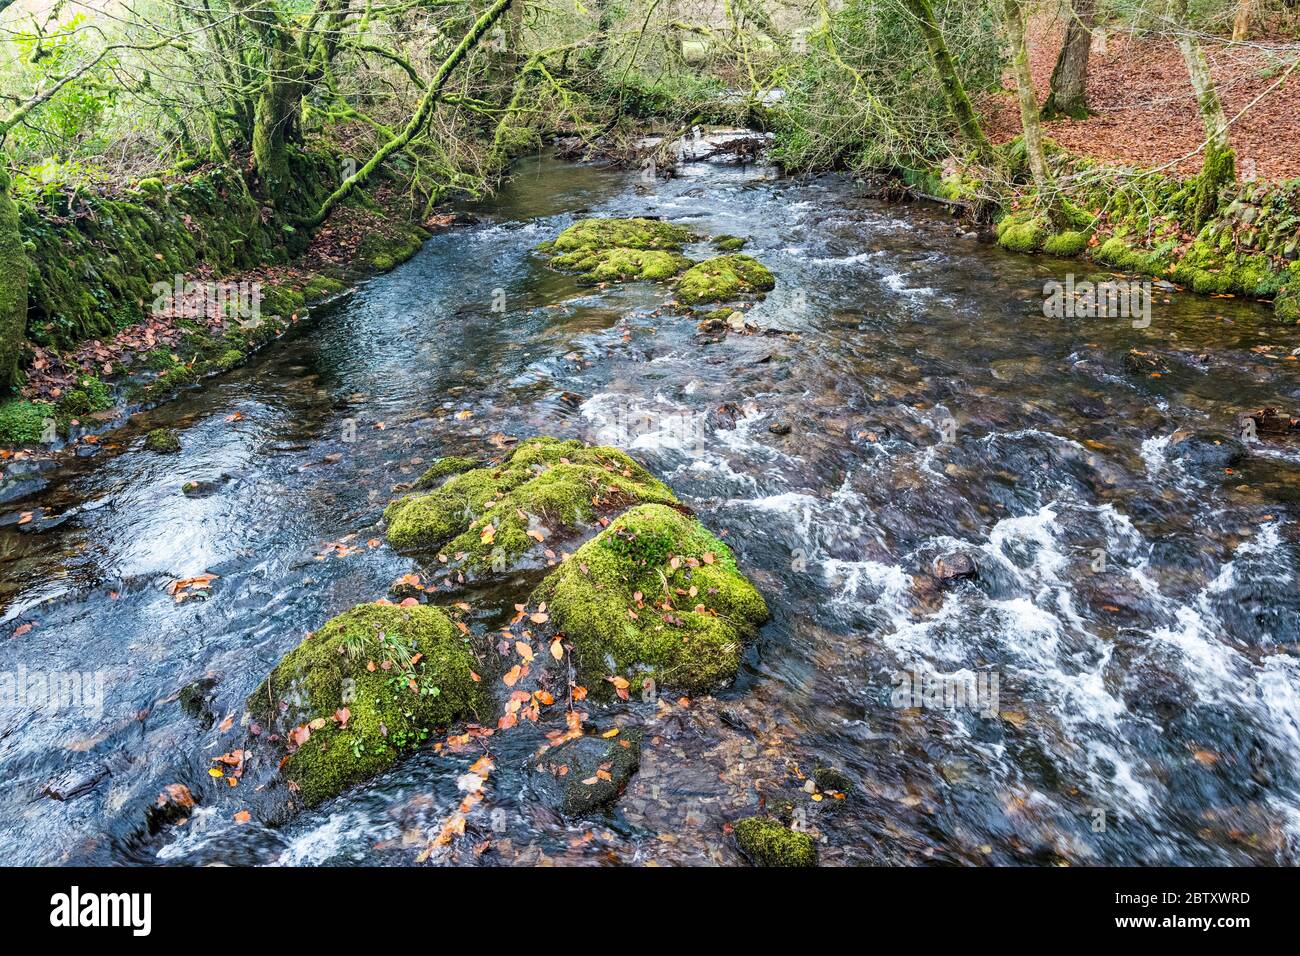 The River Lyd near Lydford, upstream from the Lydford Gorge, Dartmoor National Park, Devon, England, UK. Stock Photo